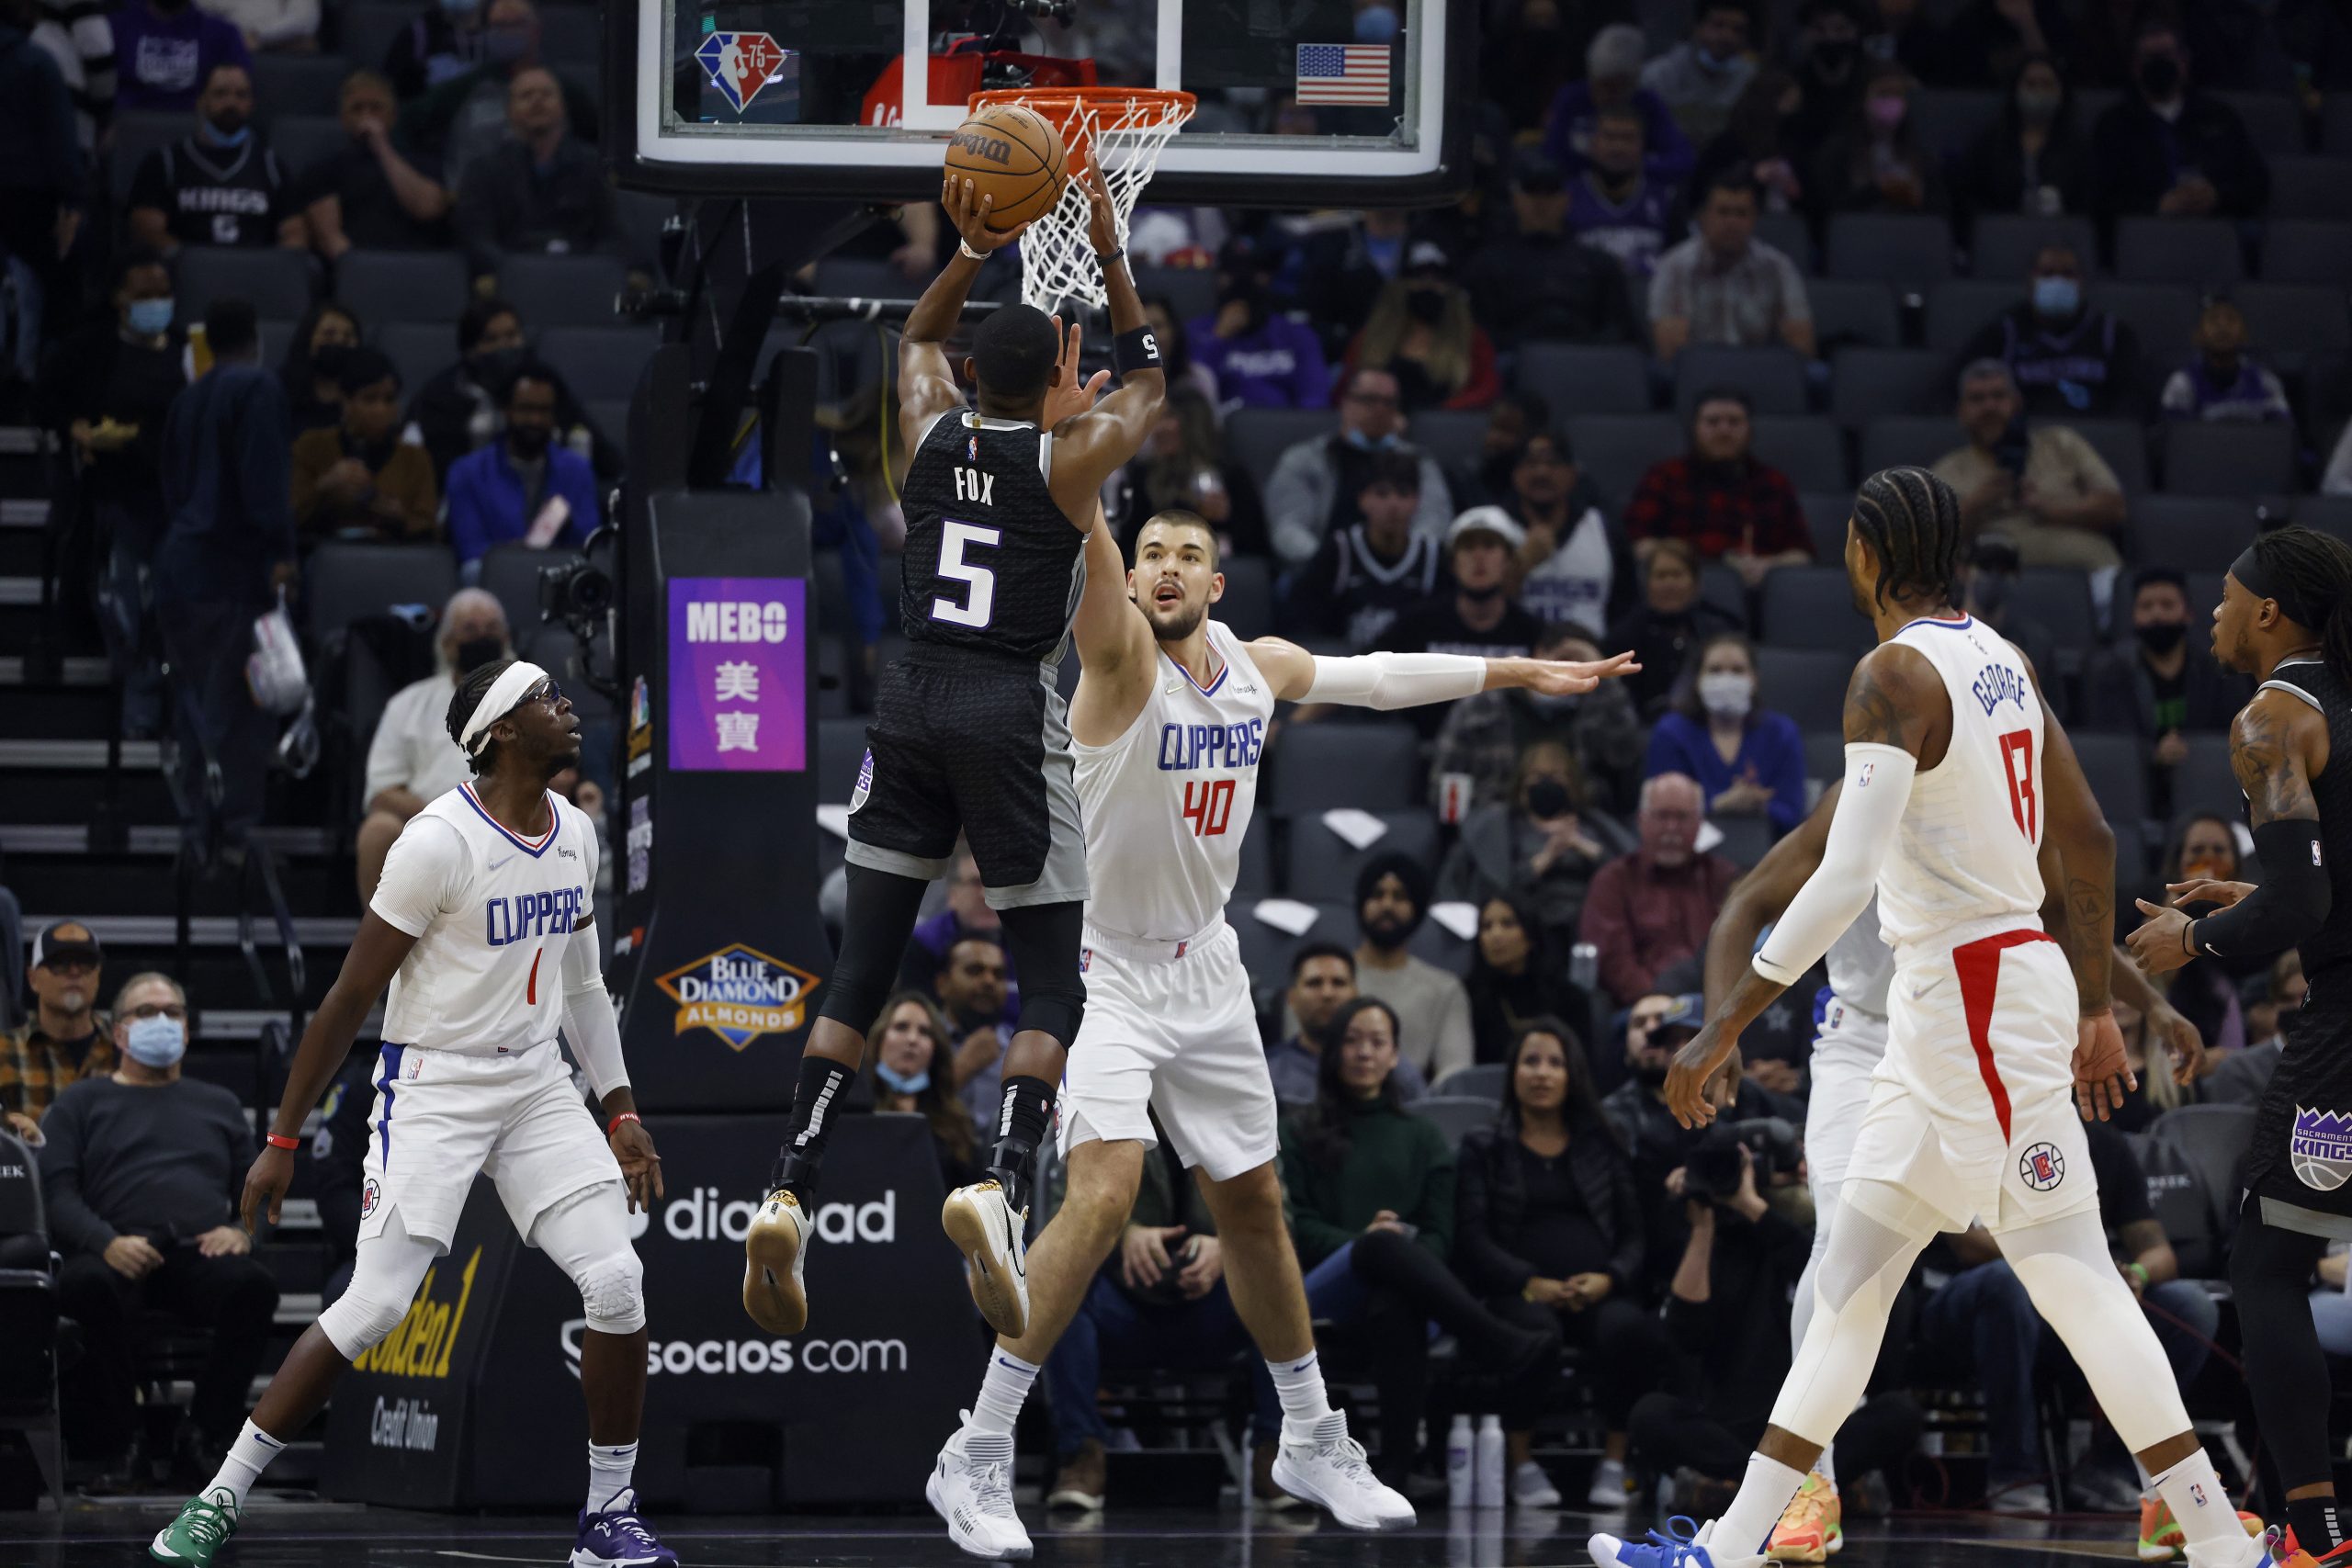 epa09622880 Sacramento Kings guard De'Aaron Fox (2-L) shoots a two point basket as LA Clippers center Ivica Zubac (C) defends during the first half of their NBA game at the Golden 1 Center in Sacramento, California, USA, 04 December 2021.  EPA/JOHN G. MABANGLO  SHUTTERSTOCK OUT